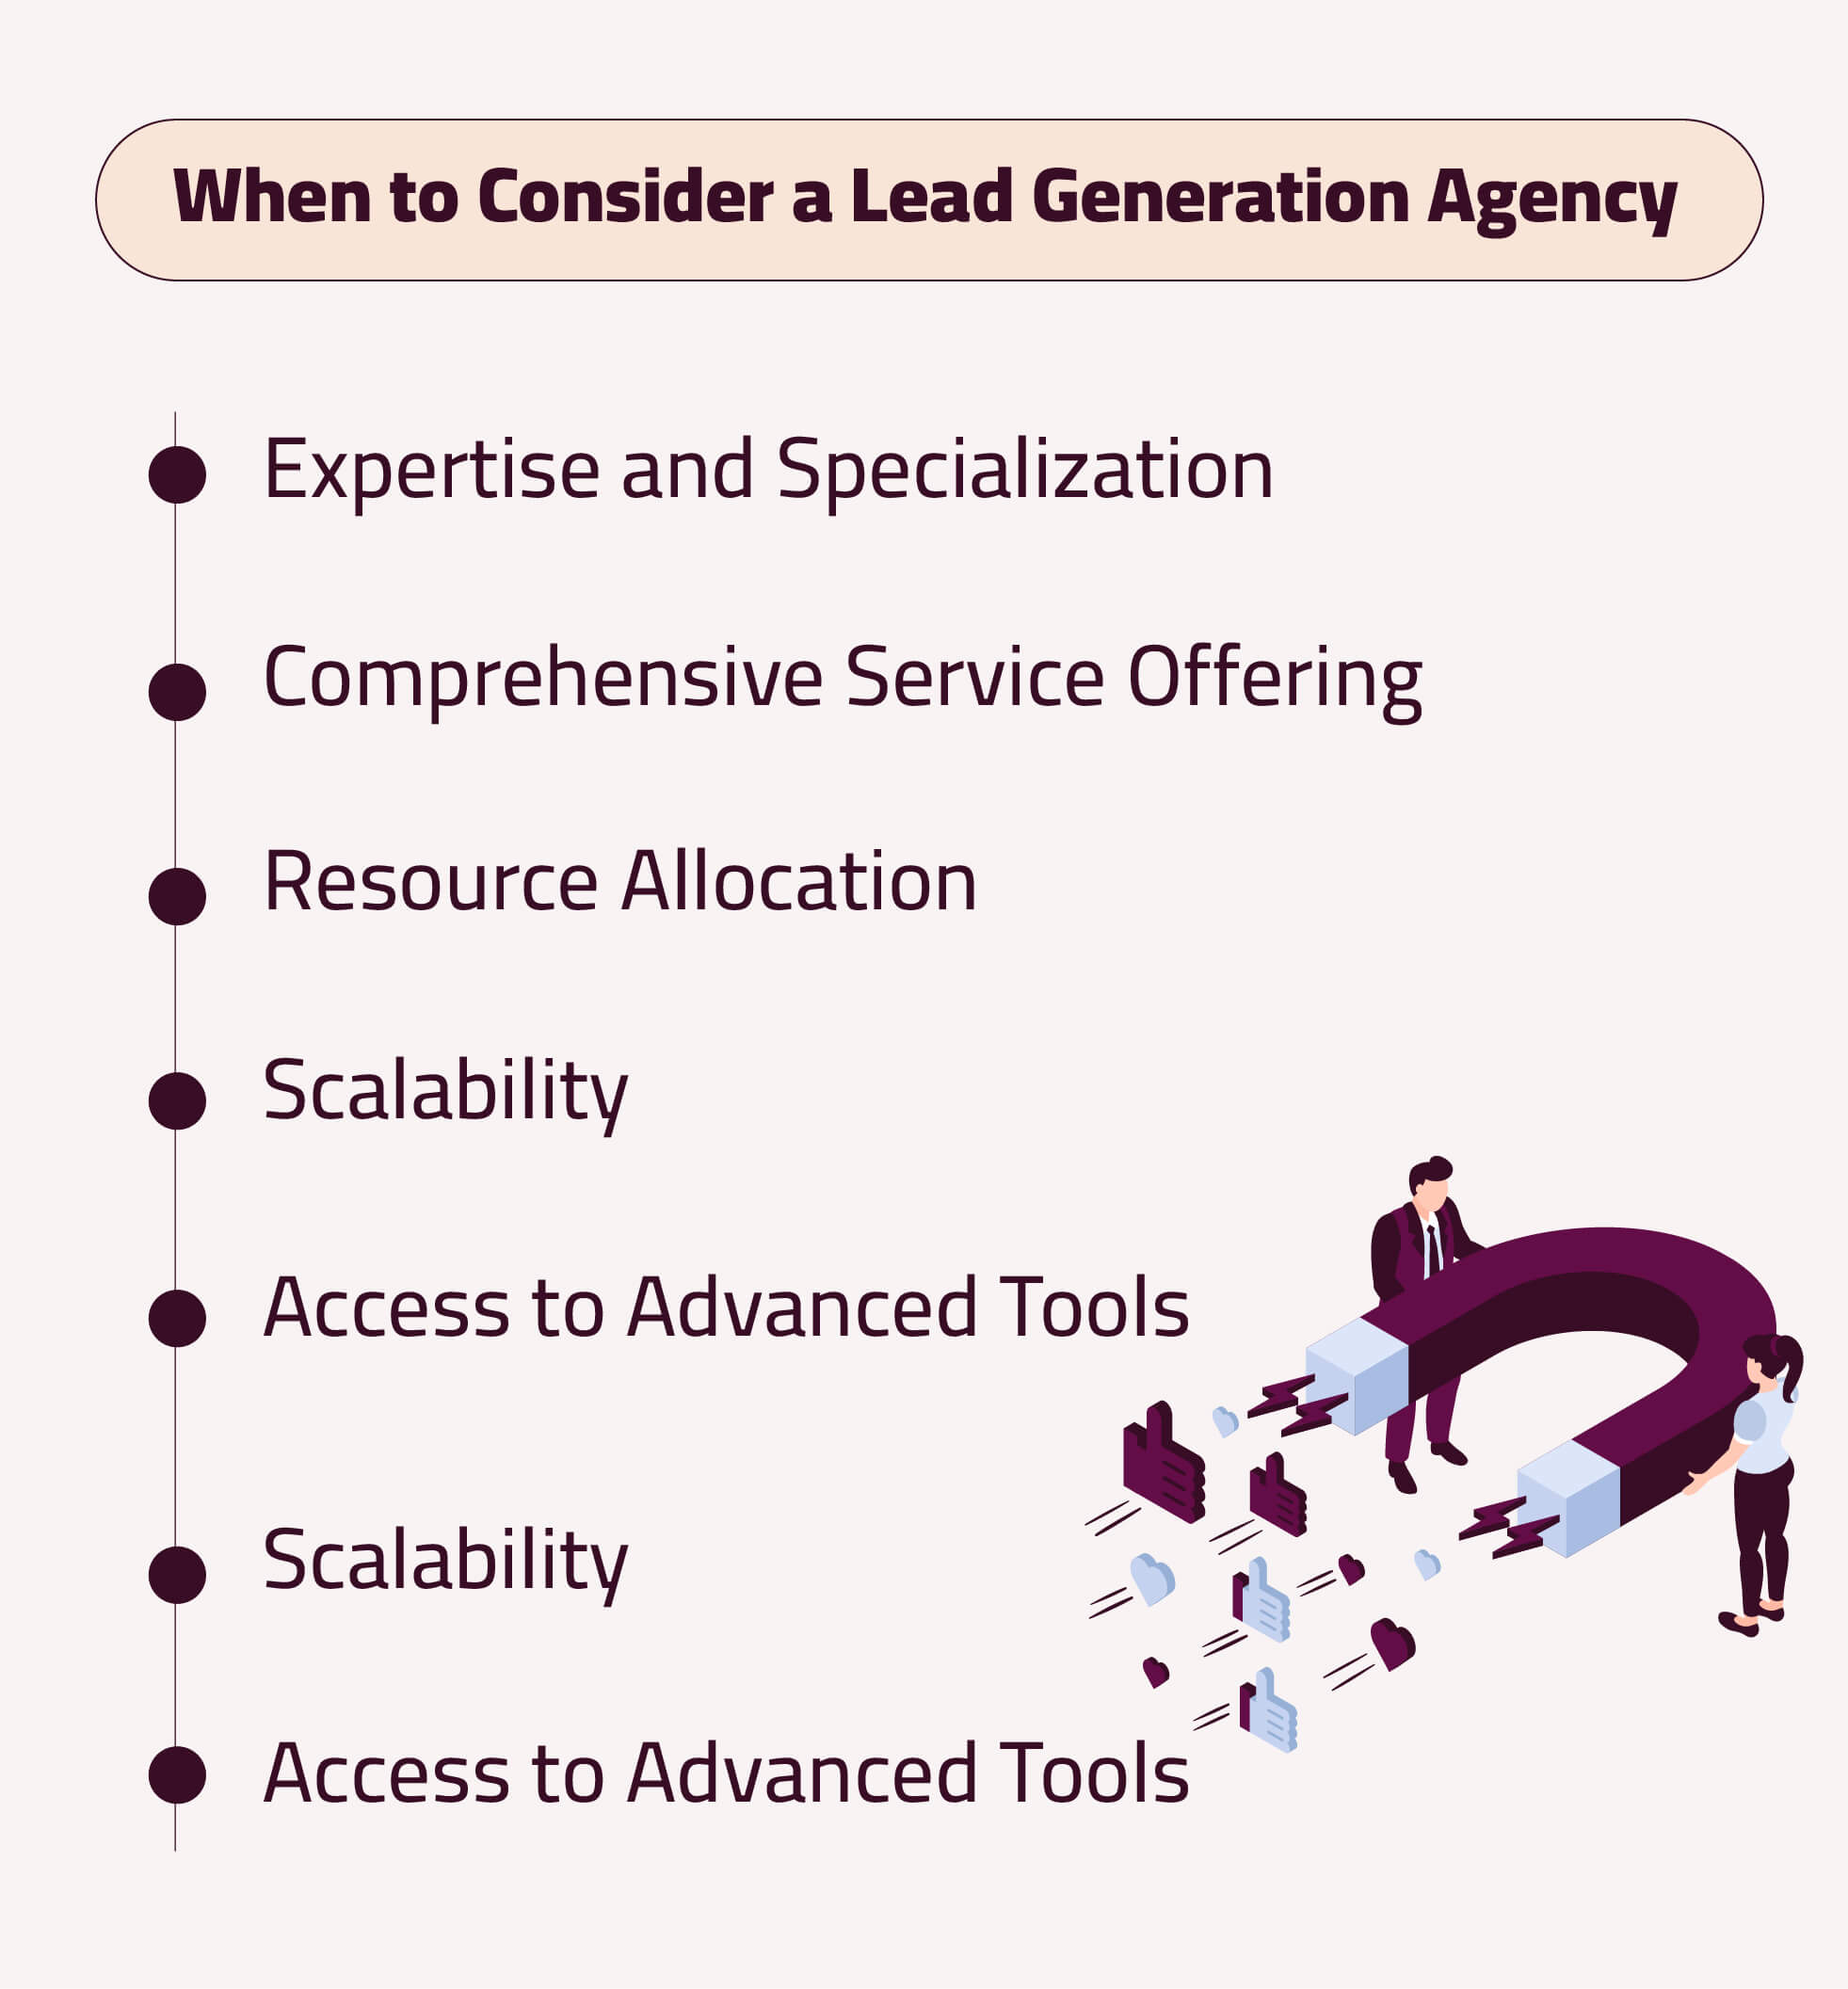 When to Consider a Lead Generation Agency